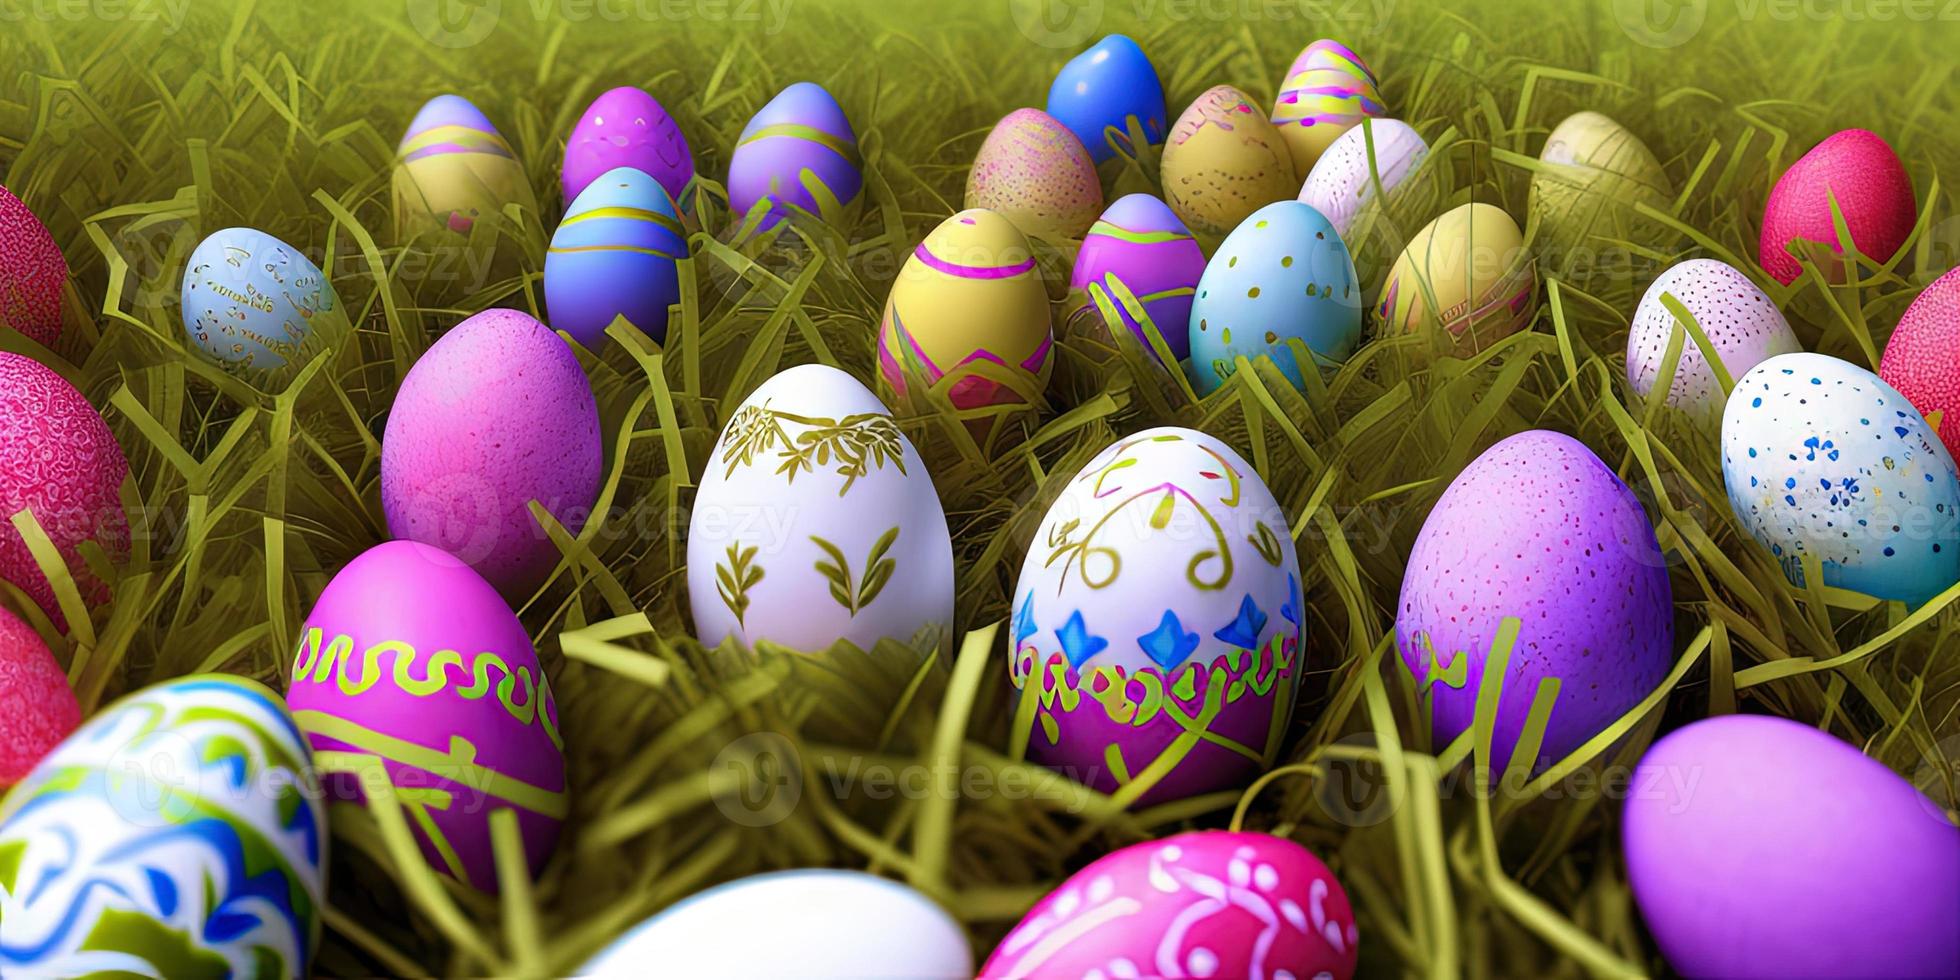 Easter background with decorated Easter eggs on a green meadow in the spring season. photo